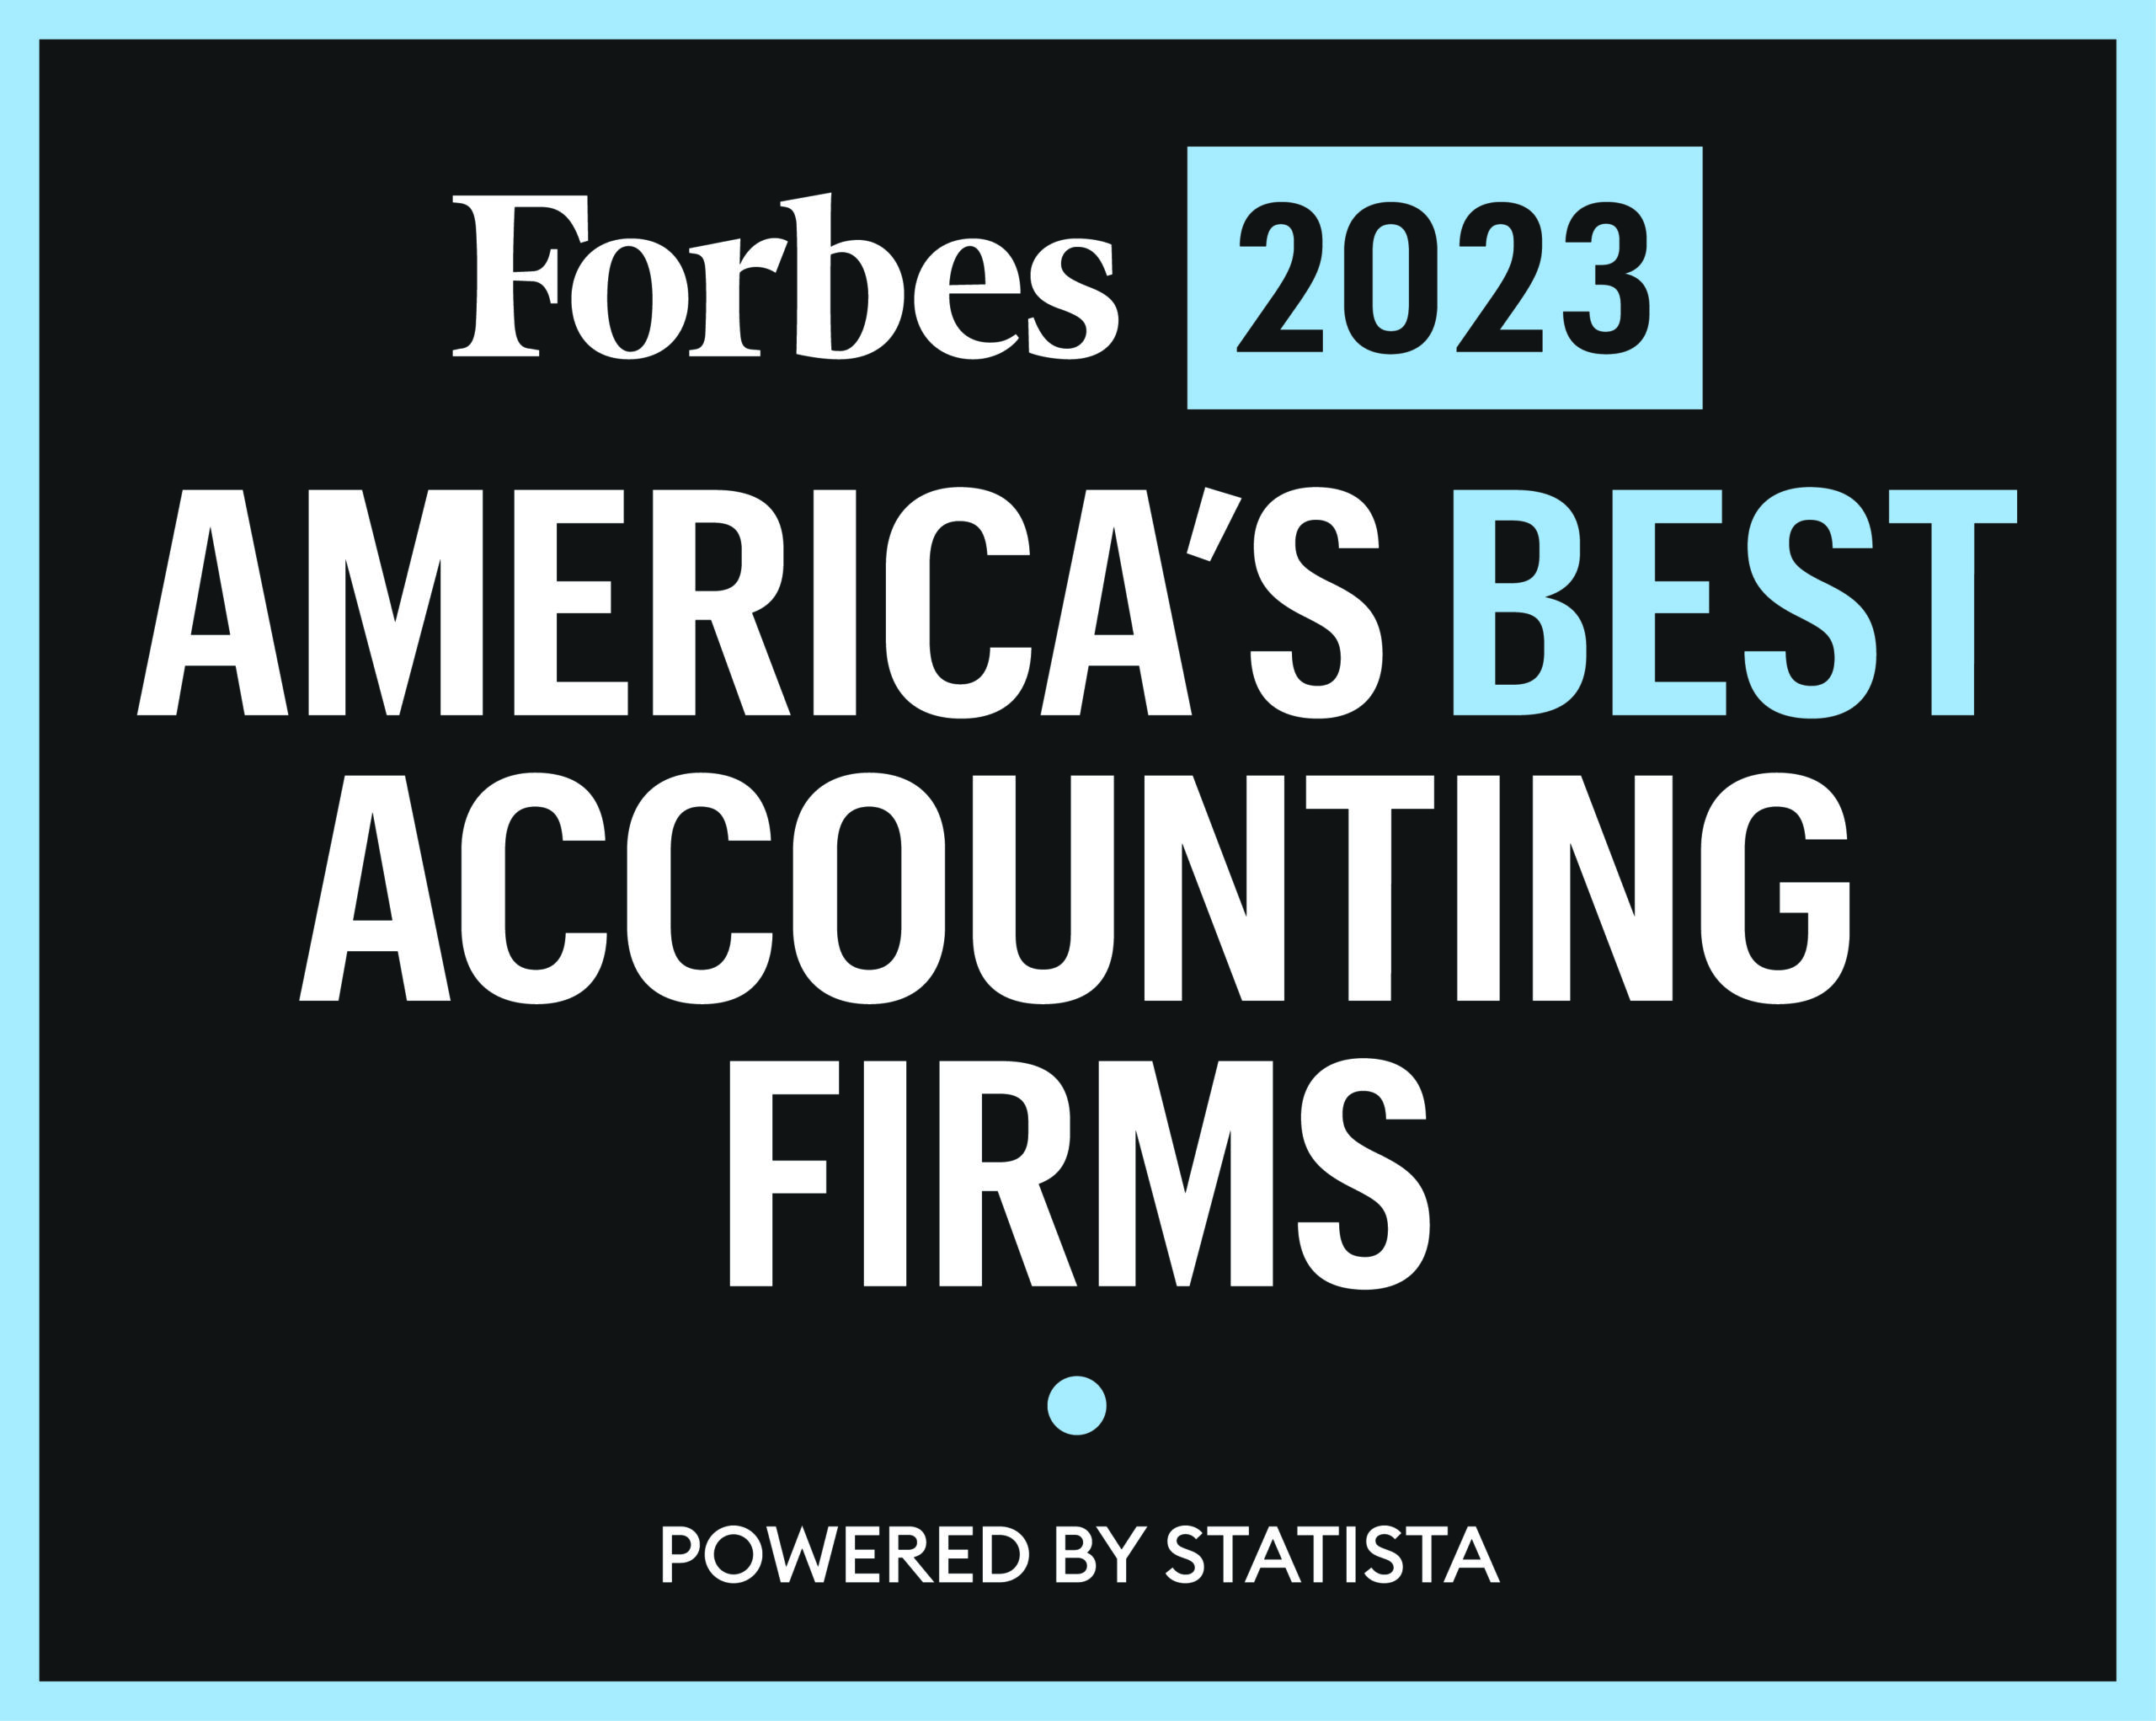 Forbes Best Accounting Firms logo